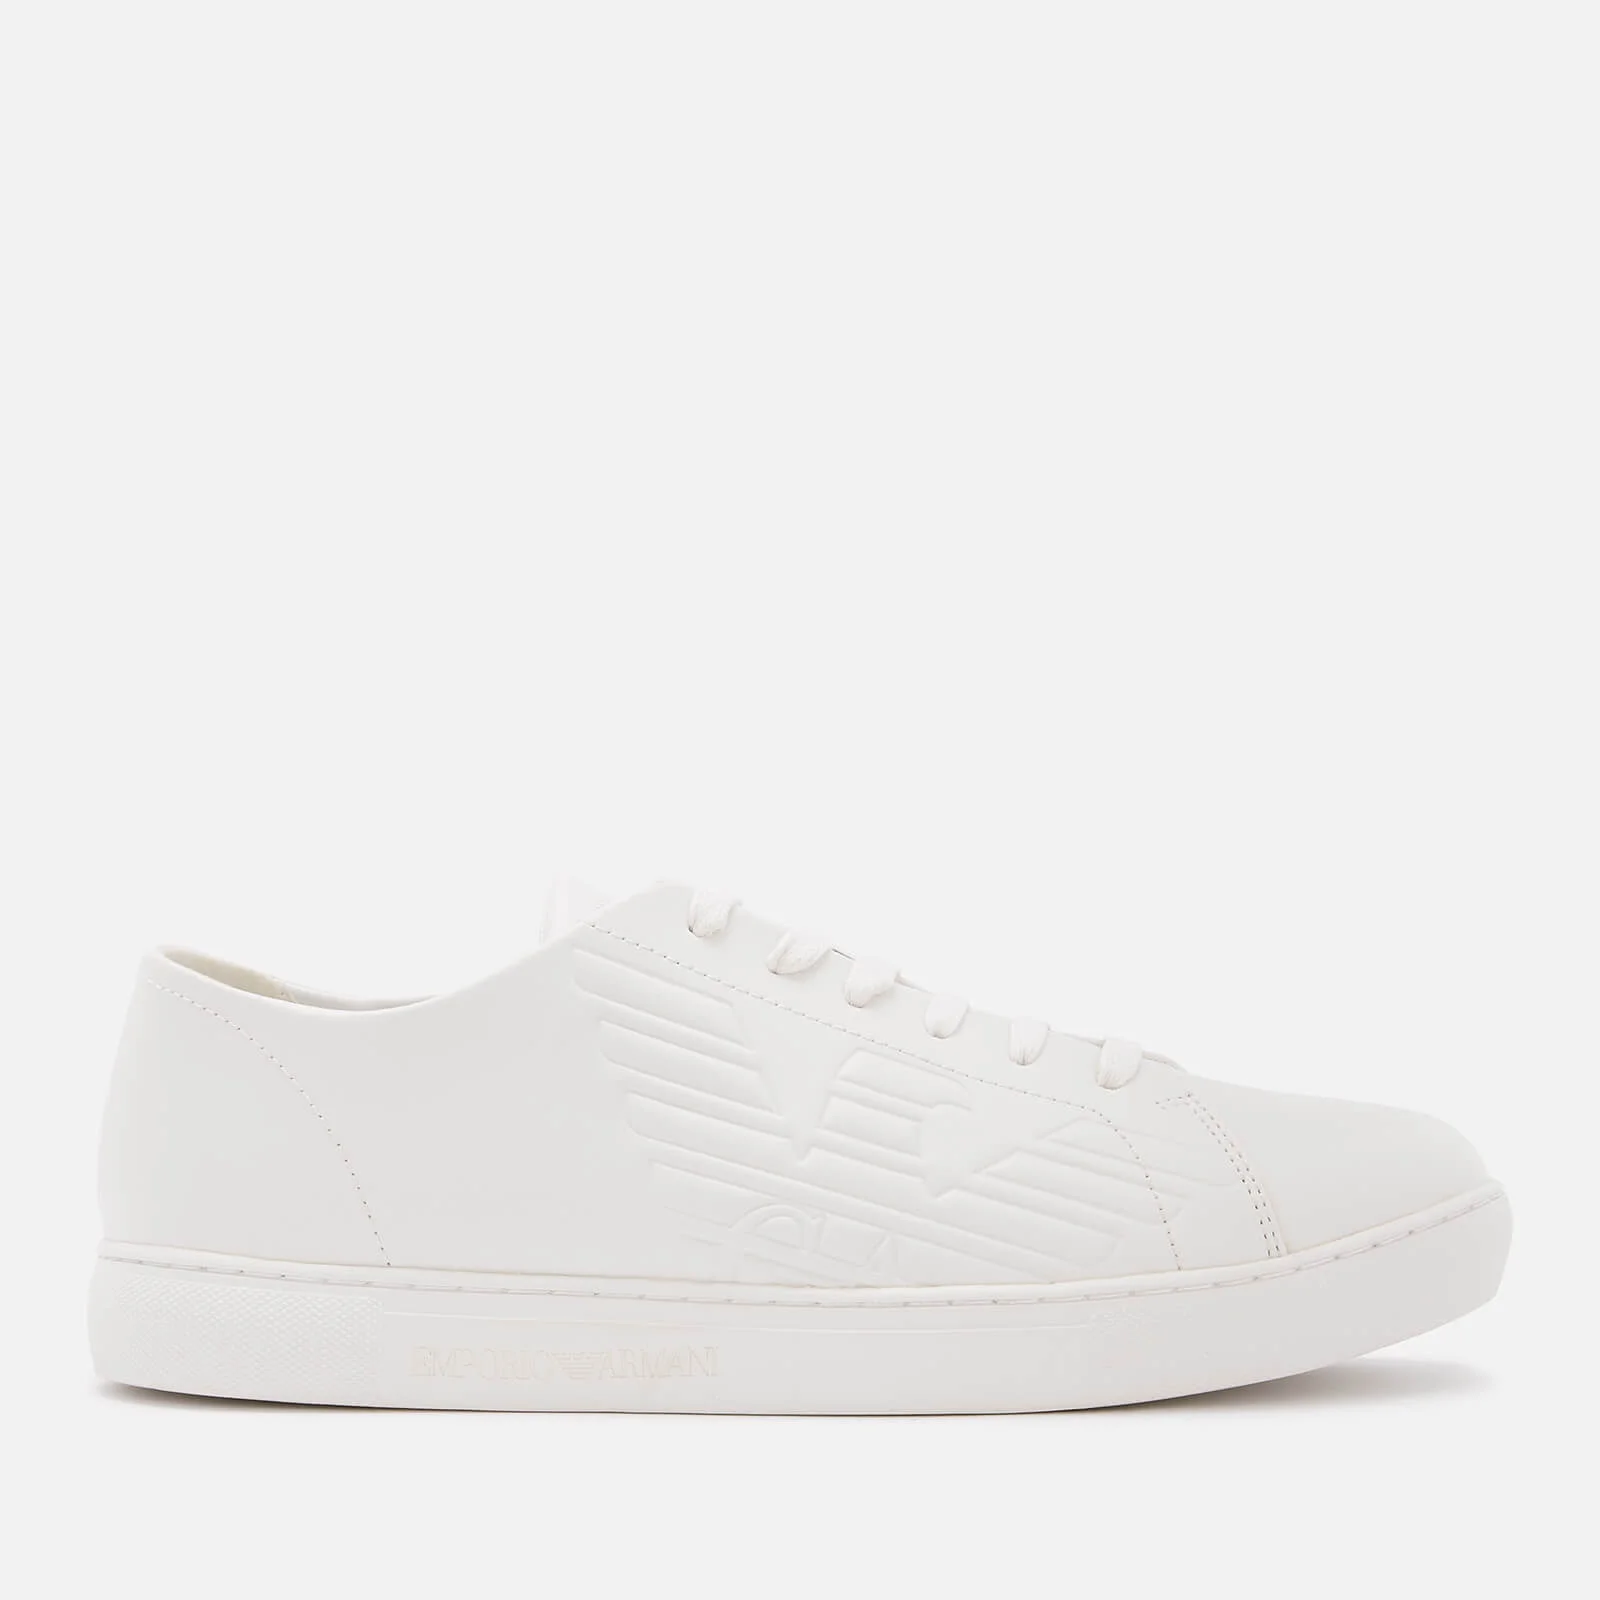 Emporio Armani Men's Stan Leather Low Top Trainers - Optical White Image 1